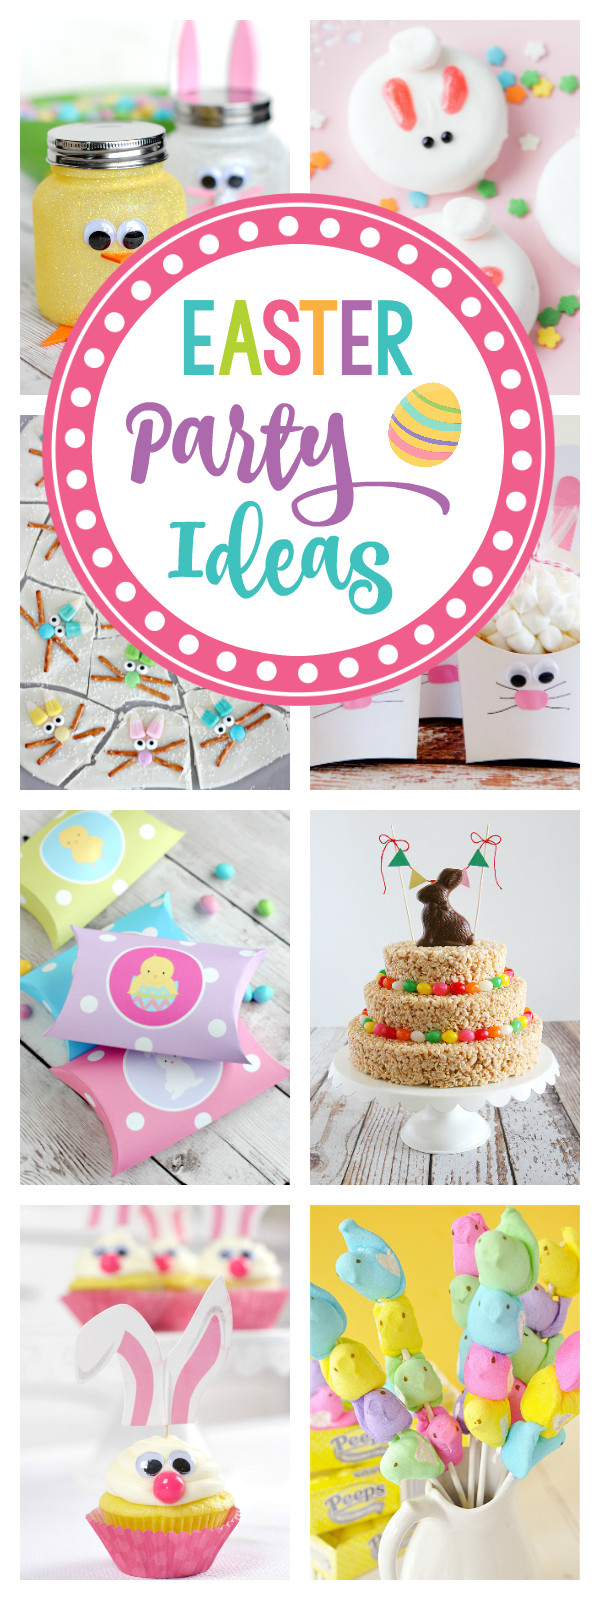 Easter Party For Kids Ideas
 25 Fun Easter Party Ideas for Kids – Fun Squared